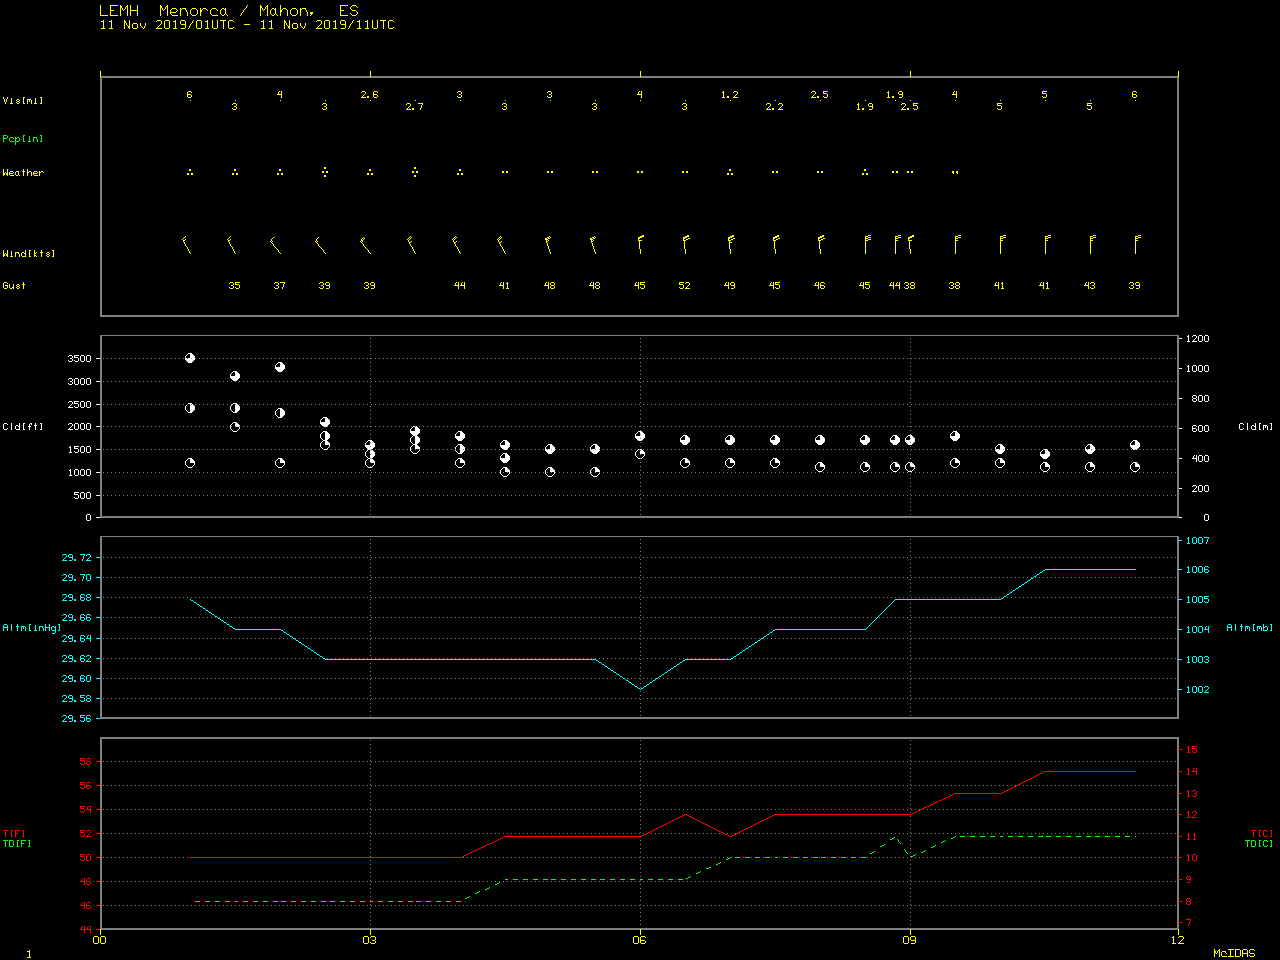 Time series of surface observation data from Menorca, Spain [click to enlarge]